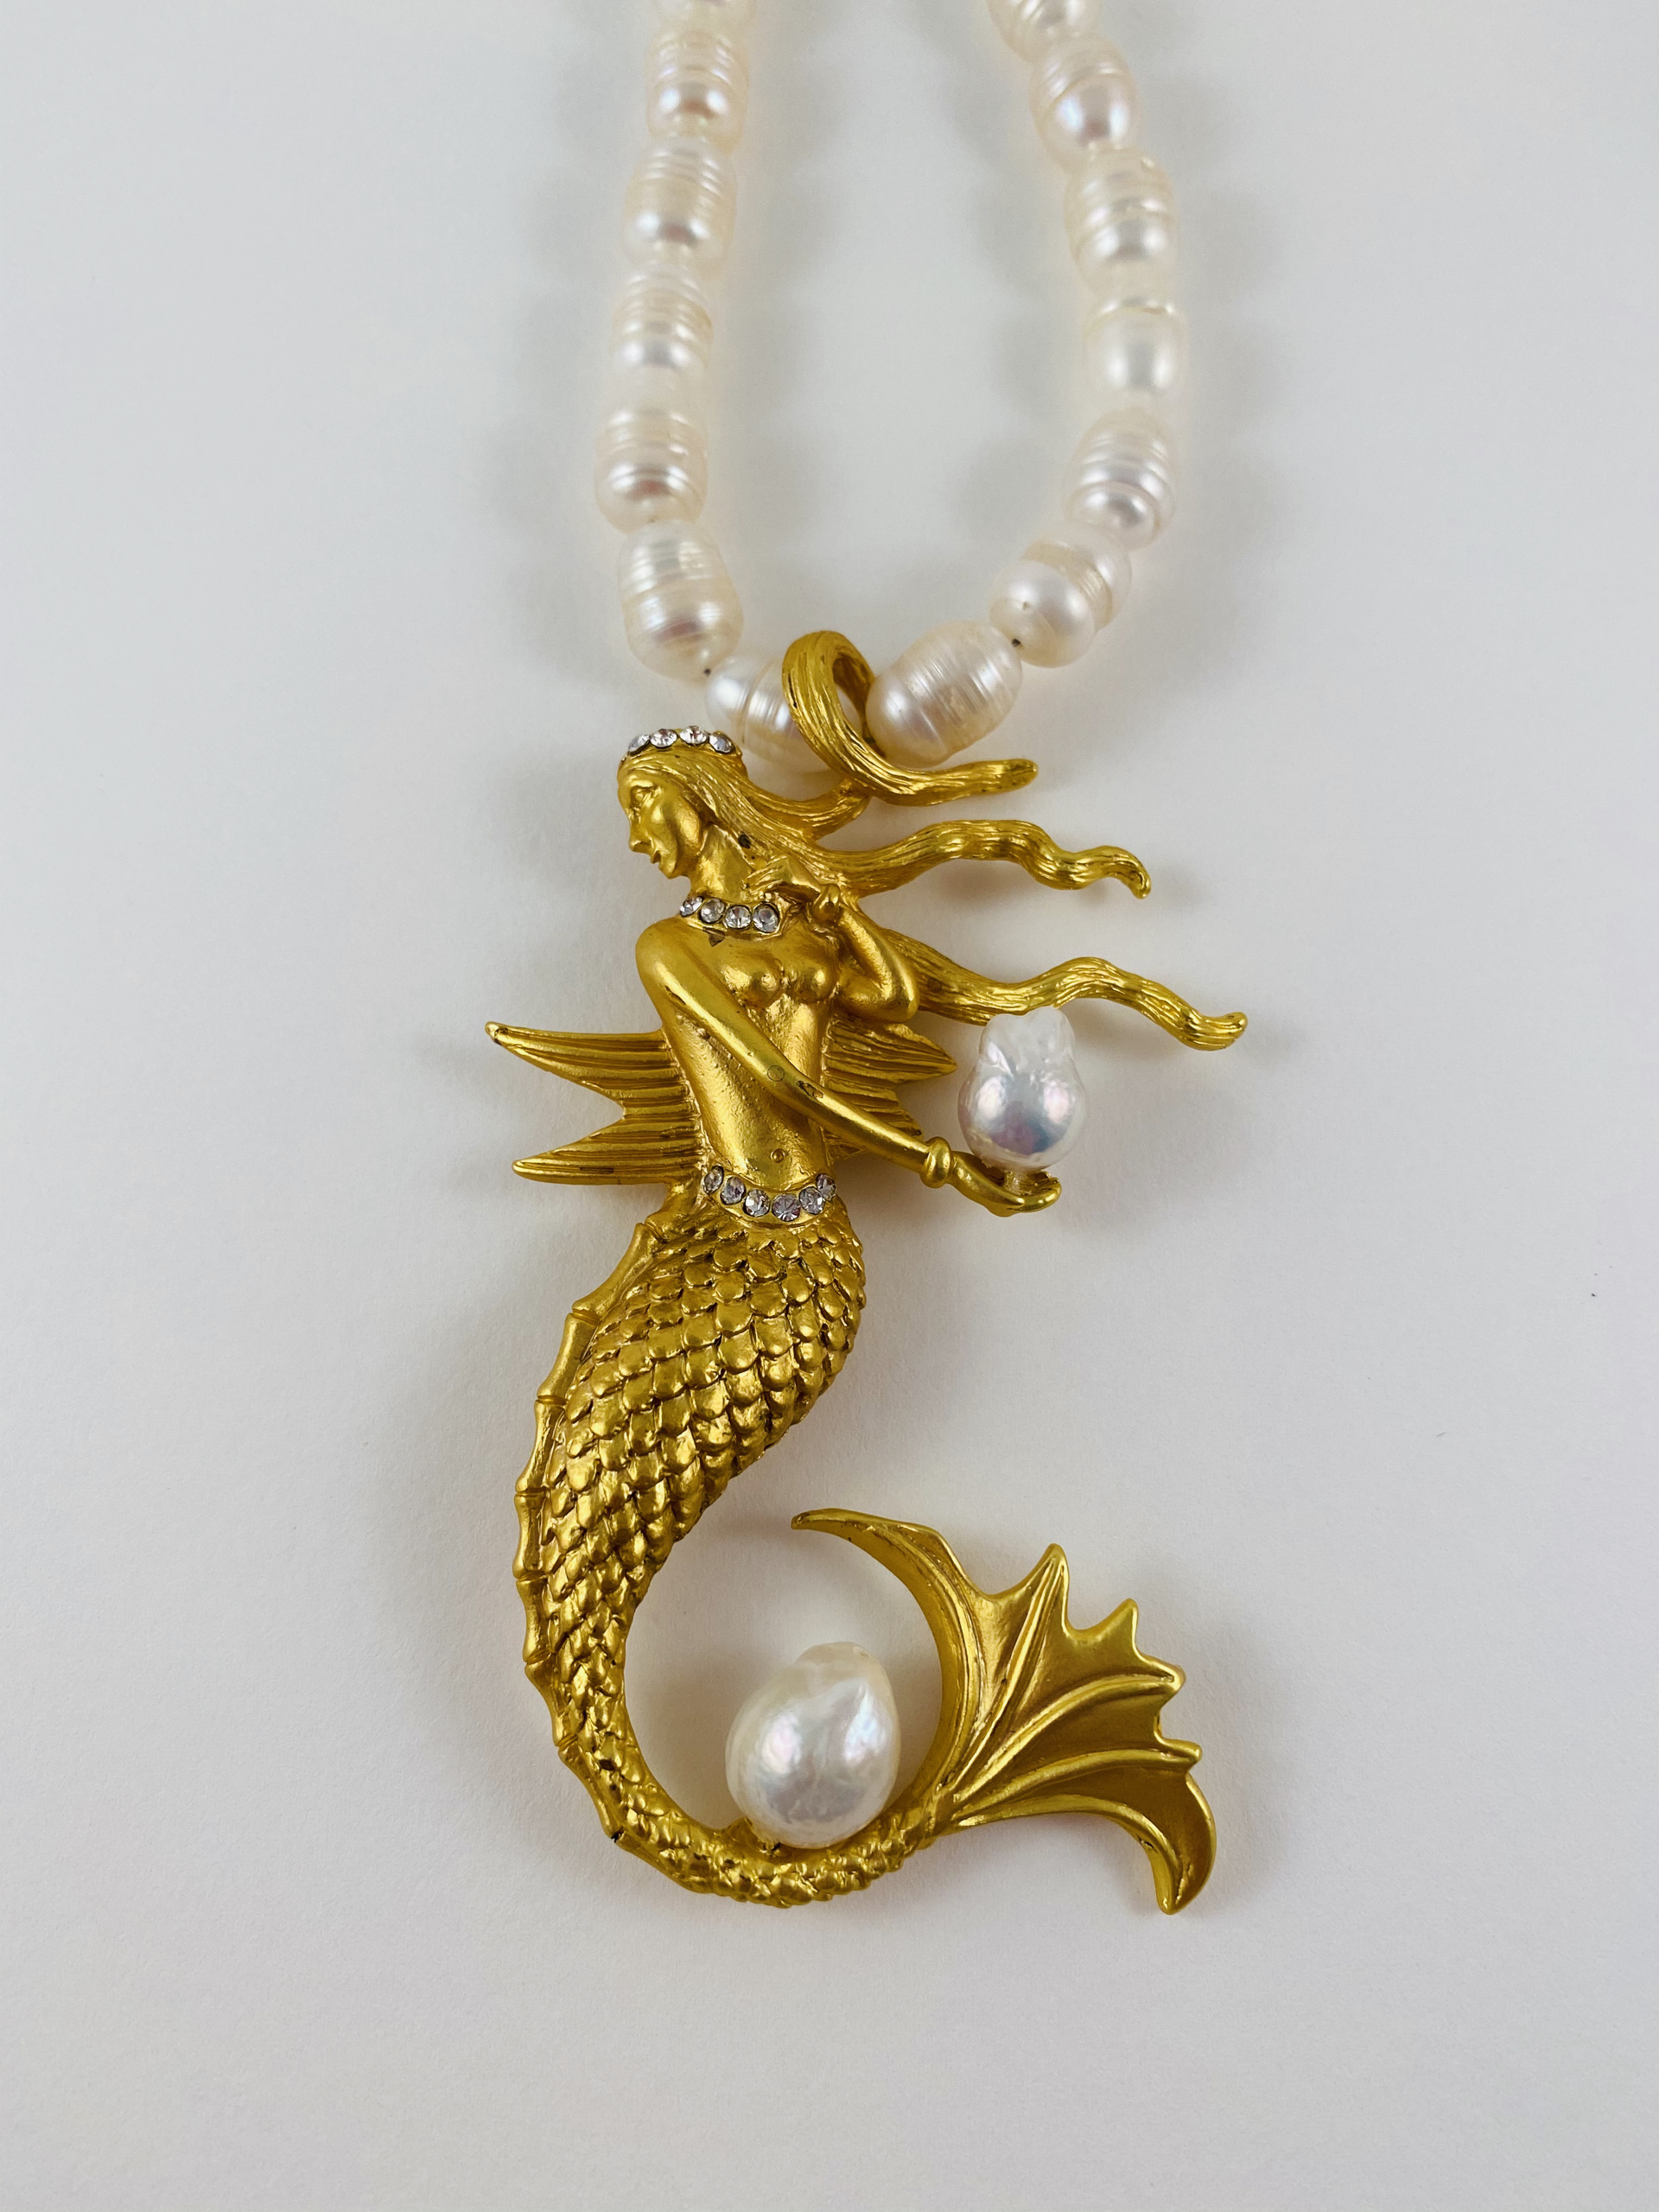 White Pearl Necklace, designer pendant (gold plate) by Nance Trueworthy